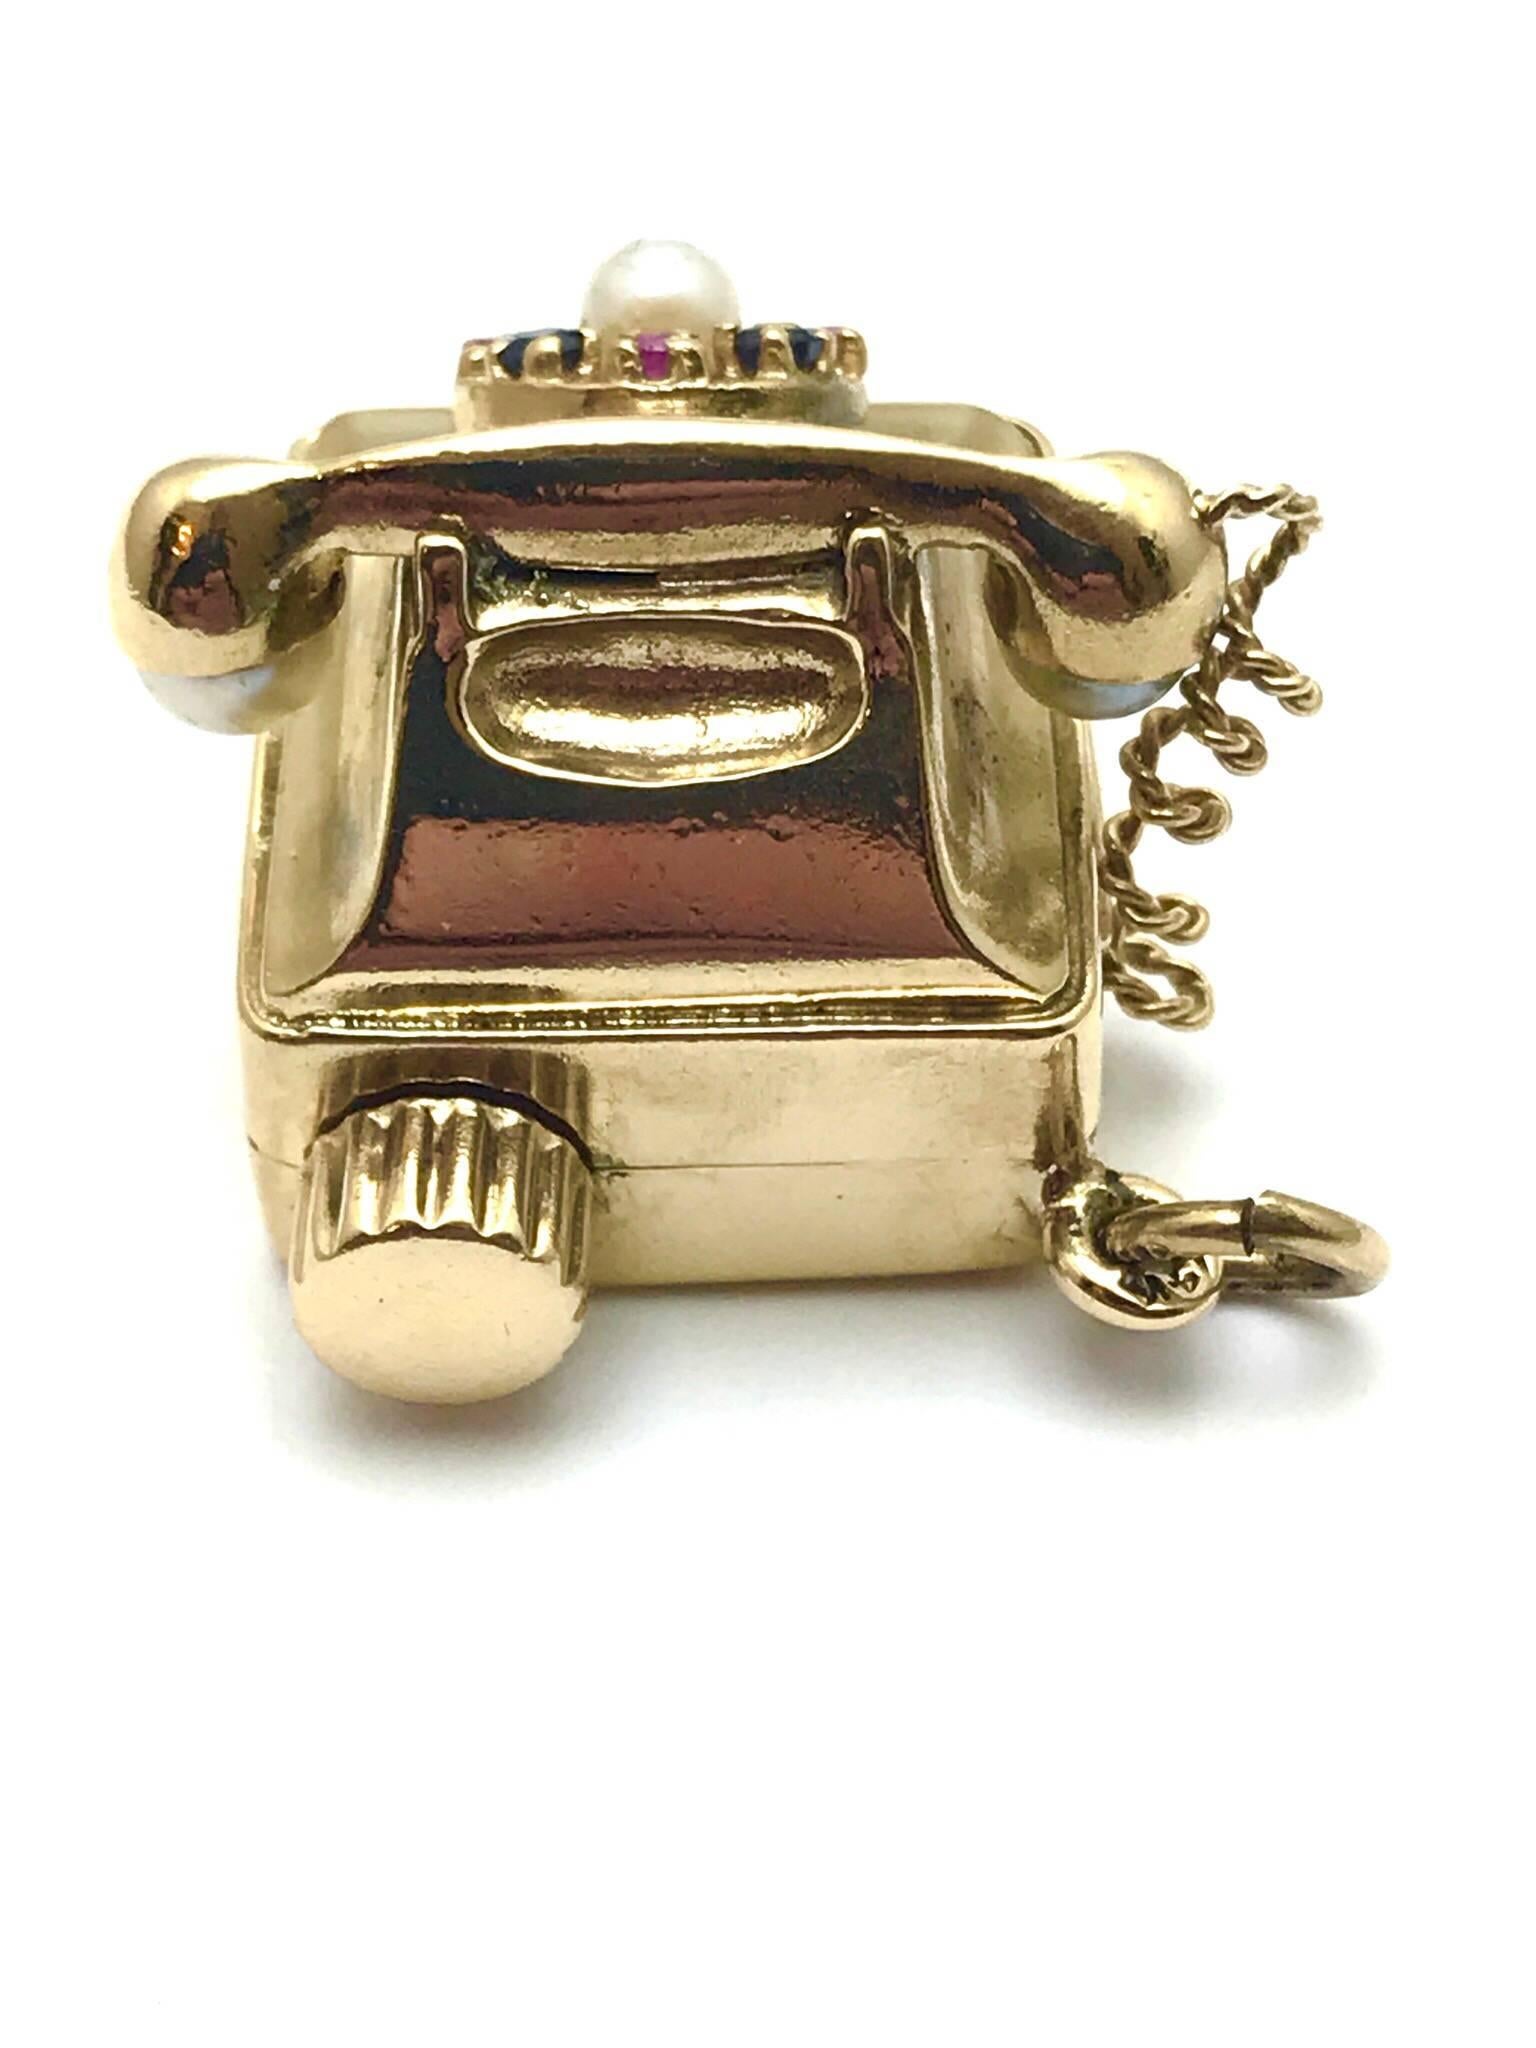 A pearl ruby and sapphire 14 karat yellow gold musical rotary phone charm presented by Charles Schwartz & Son.  The round cut rubies and sapphires along with a single pearl make up the dial of the phone, with two more pearls on the speaker and